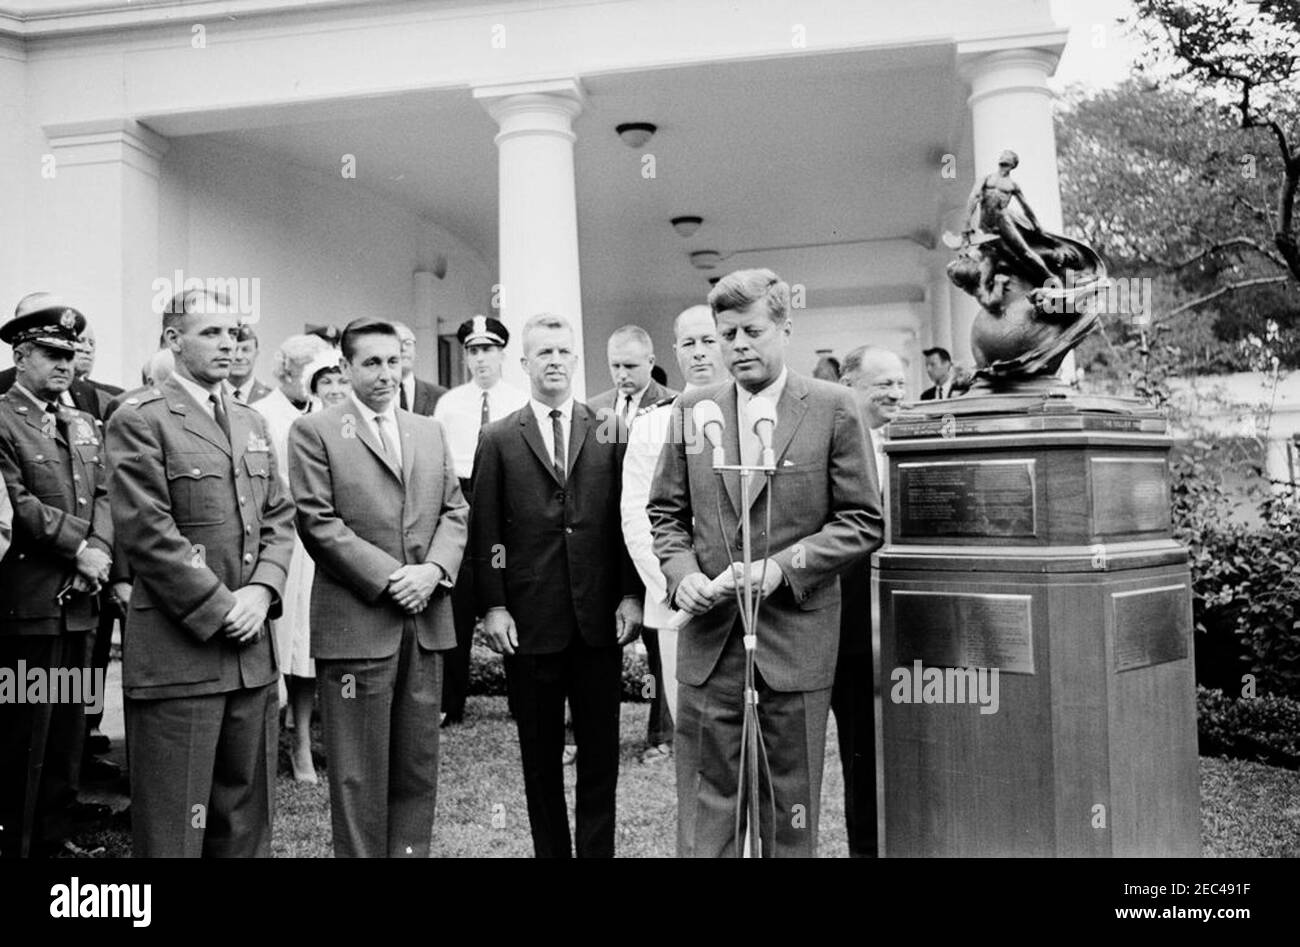 Presentation of the 1961 Collier Trophy, 11:30AM. President John F. Kennedy presents the 1961 Robert J. Collier Trophy to four X-15 pilots, on behalf of the National Aeronautic Association (NAA). Standing behind President Kennedy are the recipients (L-R): Major Robert M. White (U.S. Air Force), A. Scott Crossfield (North American Aviation), Joseph A. Walker (National Aeronautics and Space Administration), and Commander Forrest S. Petersen (U.S. Navy). Also pictured: Chief of Staff of the United States Air Force, General Curtis E. LeMay; General Omar Bradley; White House Secret Service agents, Stock Photo